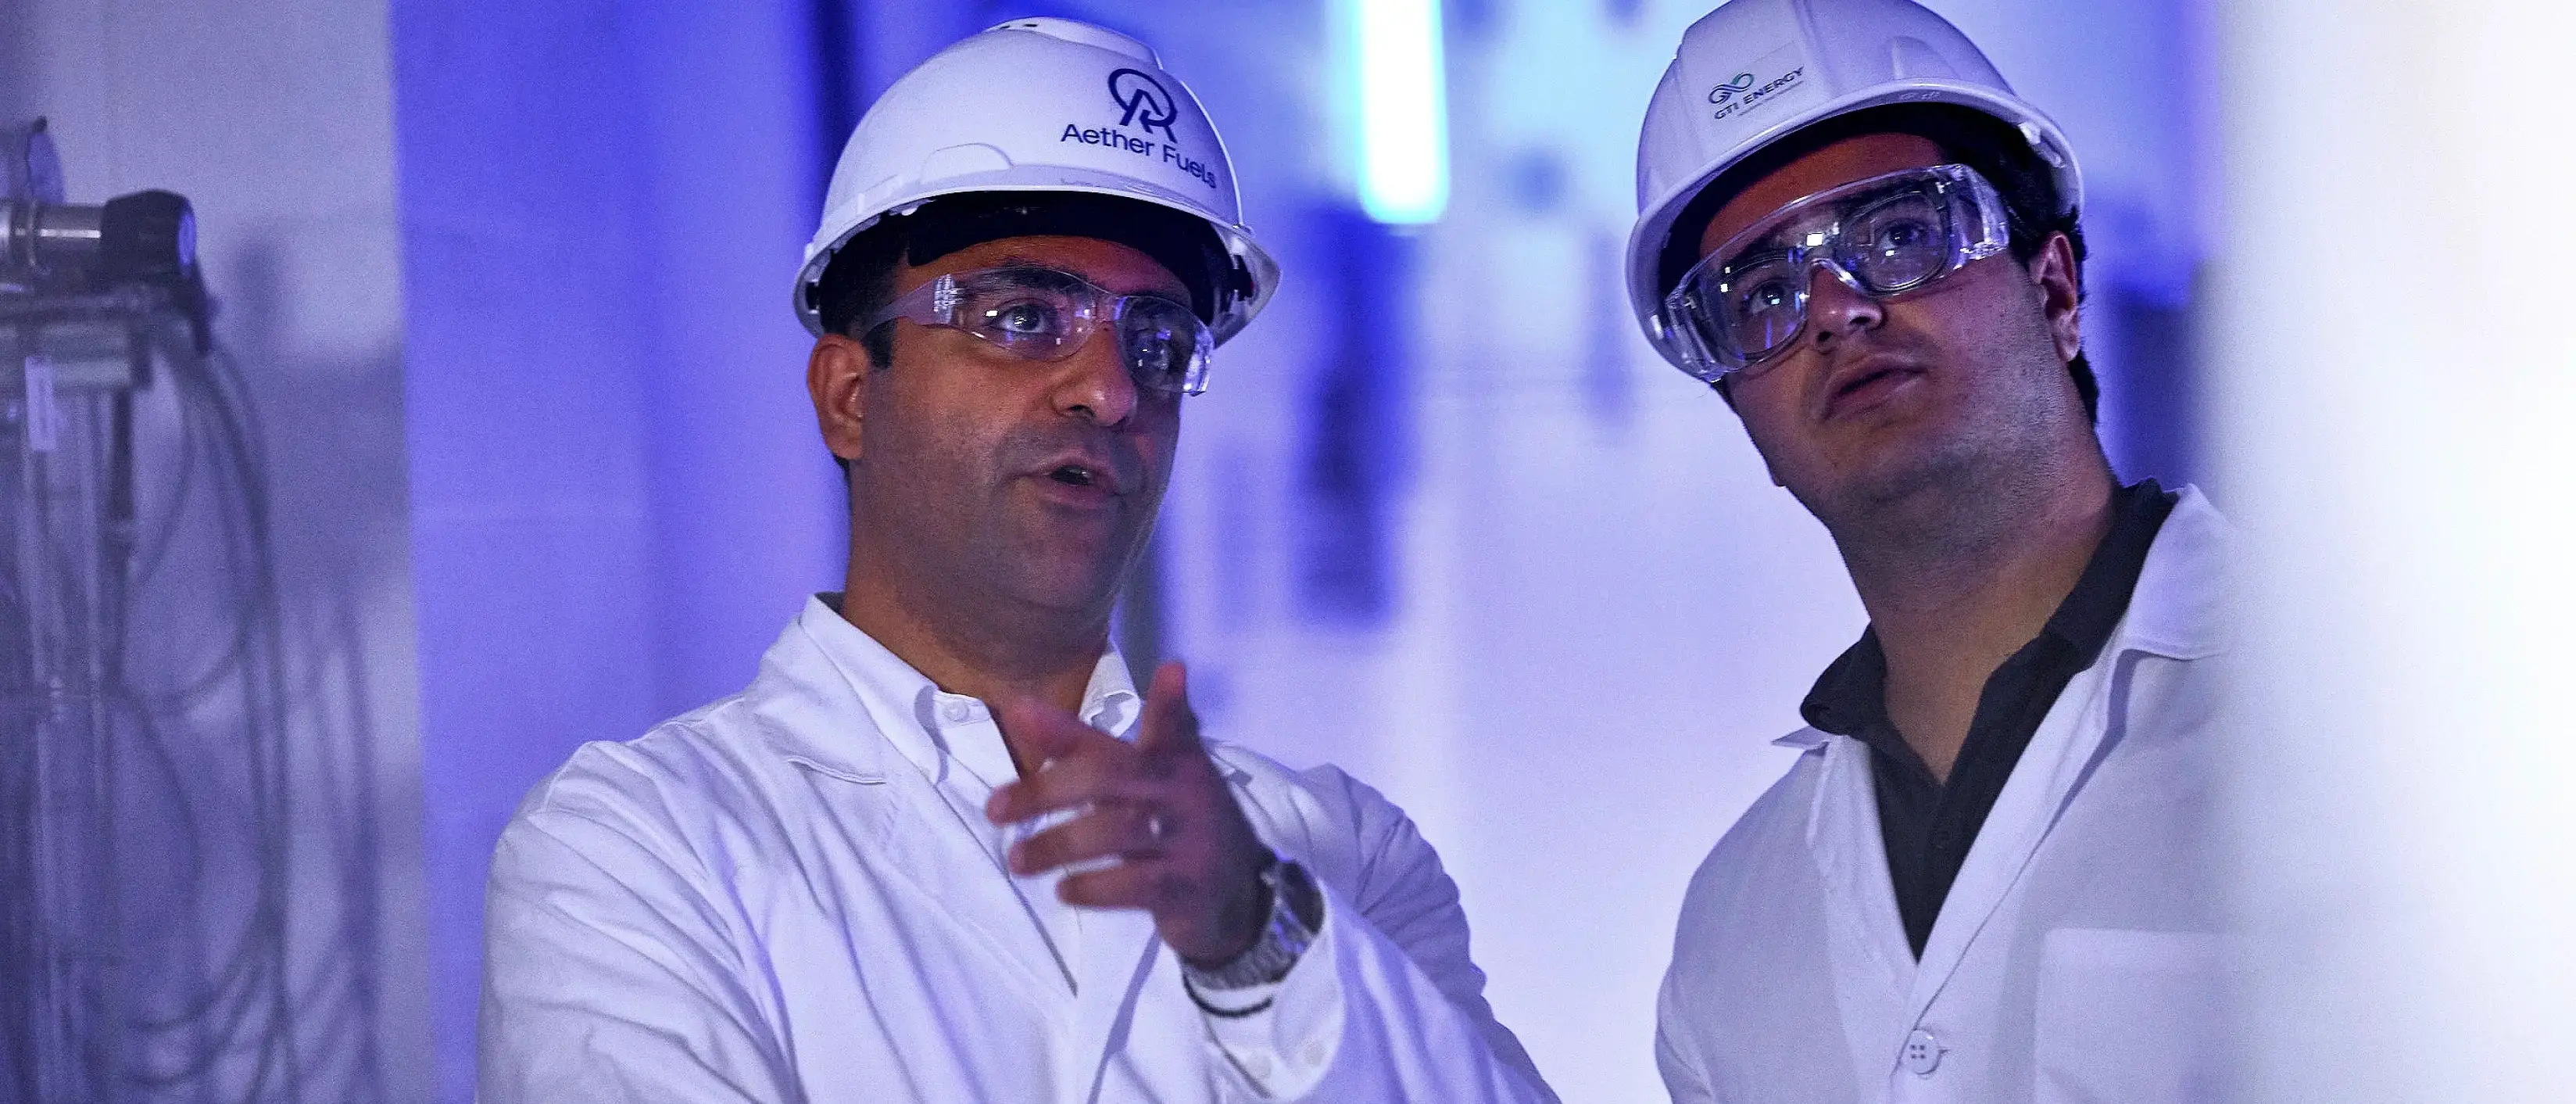 One man from Aether Fuels and another man from GTI Energy in hard hats and white coats focusing on something out of view.